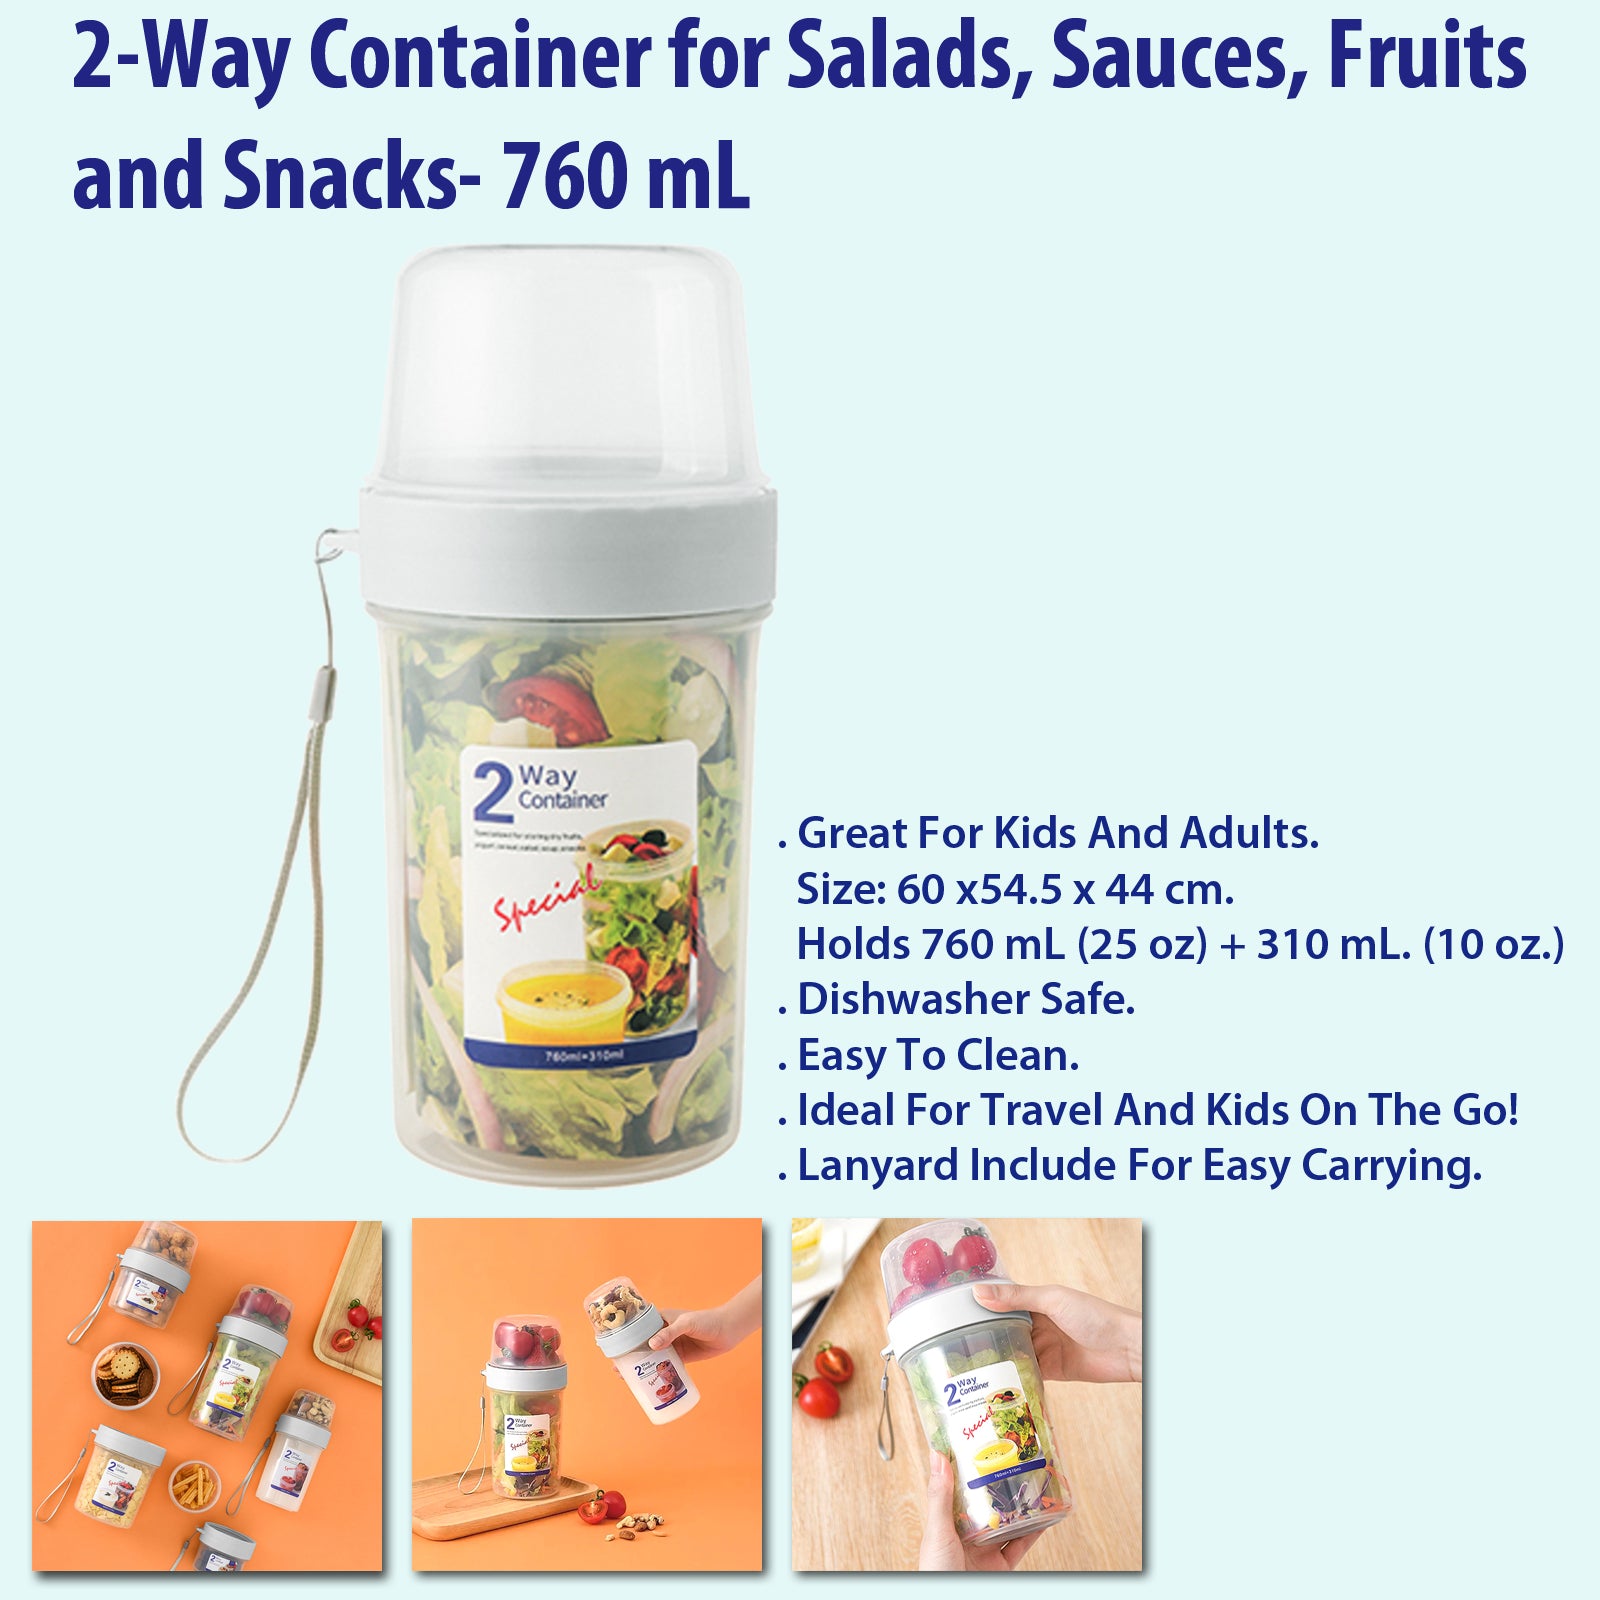 2-Way Container Salads Sauces Fruits Snacks Food Fresh 760 mL